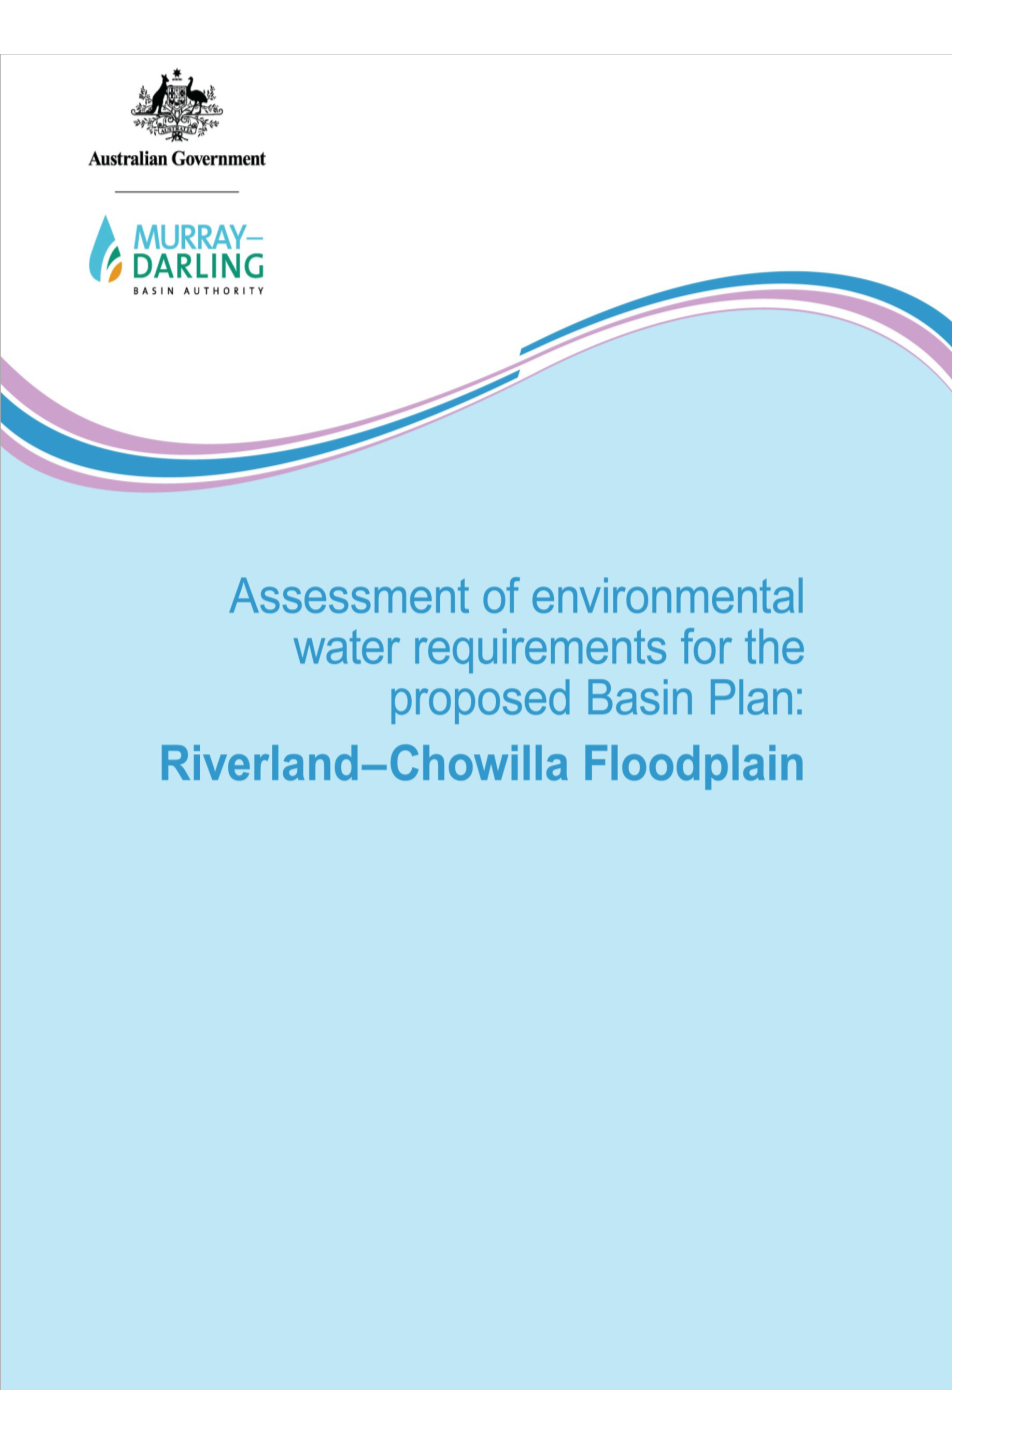 Assessment of Environmental Water Requirements for the Proposed Basin Plan: Riverland Chowilla